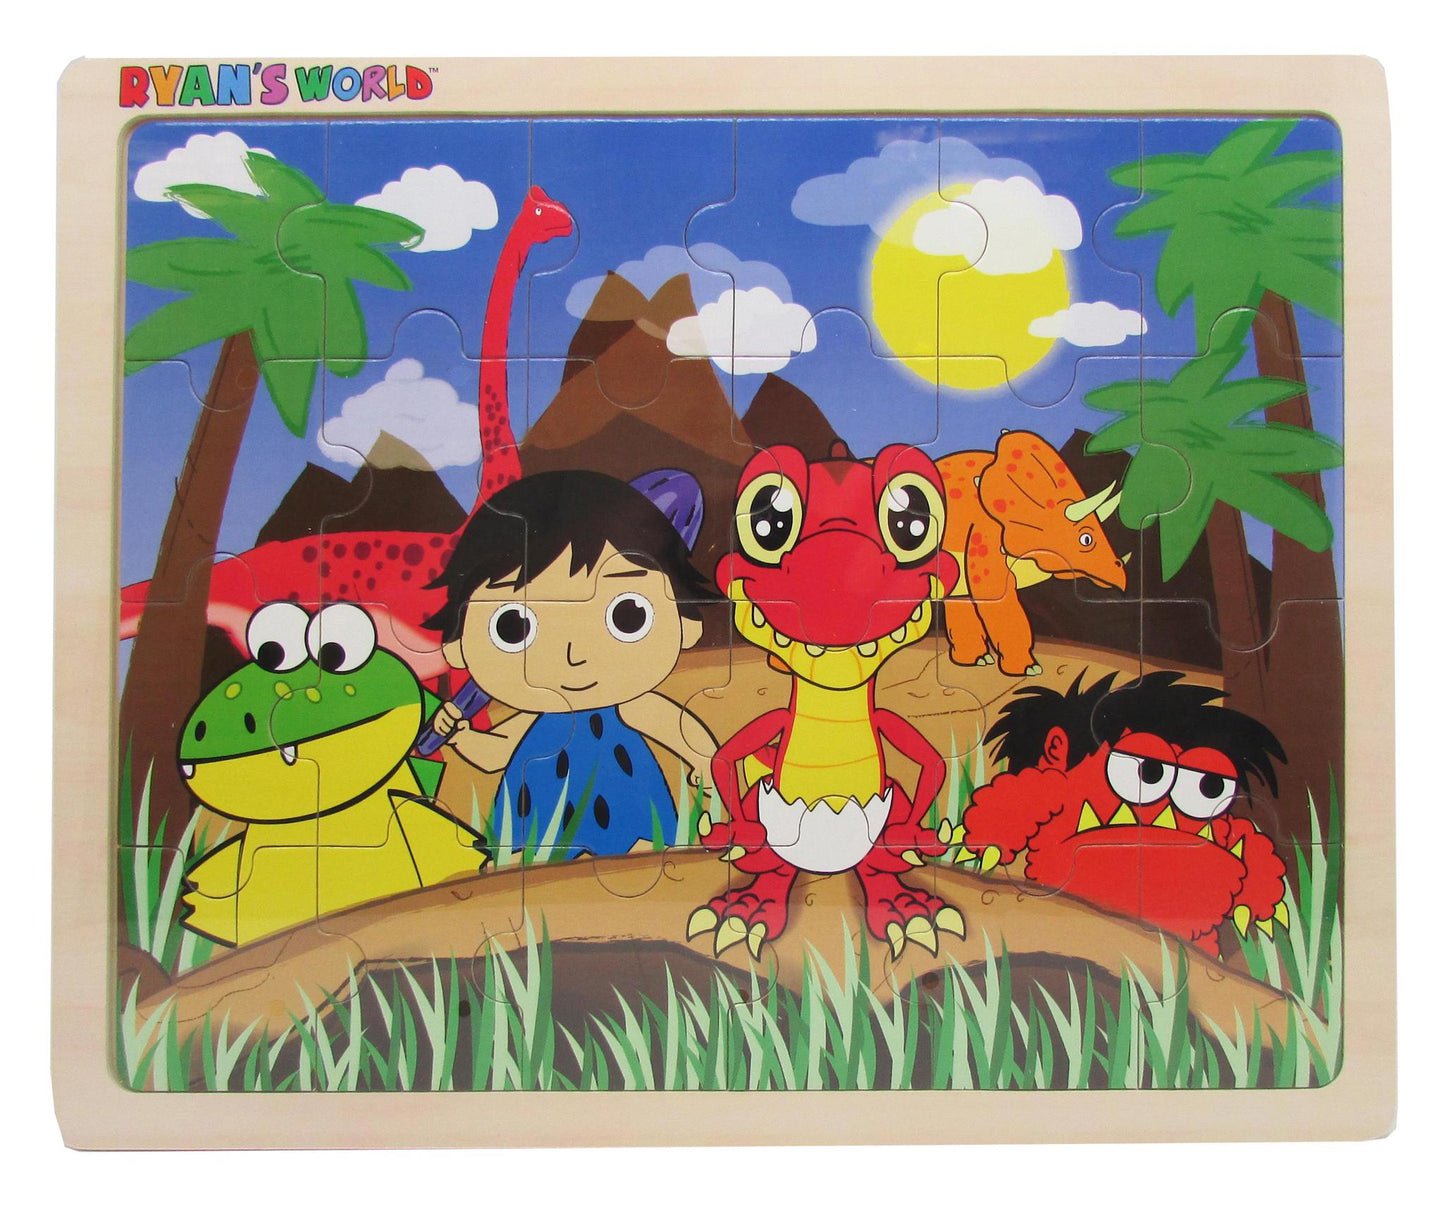 Ryan's World Jigsaw Puzzle Assortment: Red Dino and Friends, Food Truck, Pirate Adventure